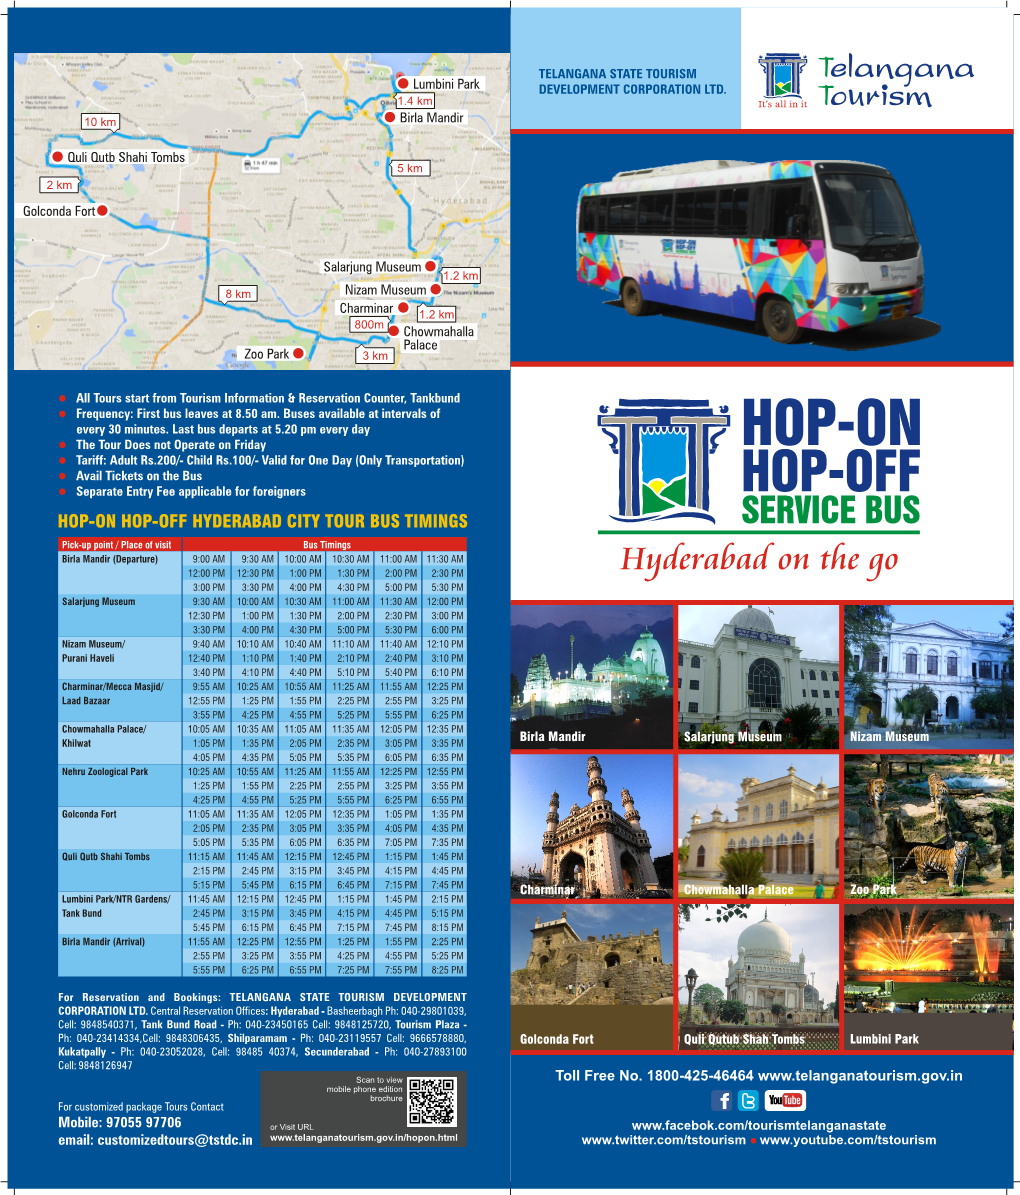 Toll Free No. 1800-425-46464 Mobile Phone Edition Brochure for Customized Package Tours Contact